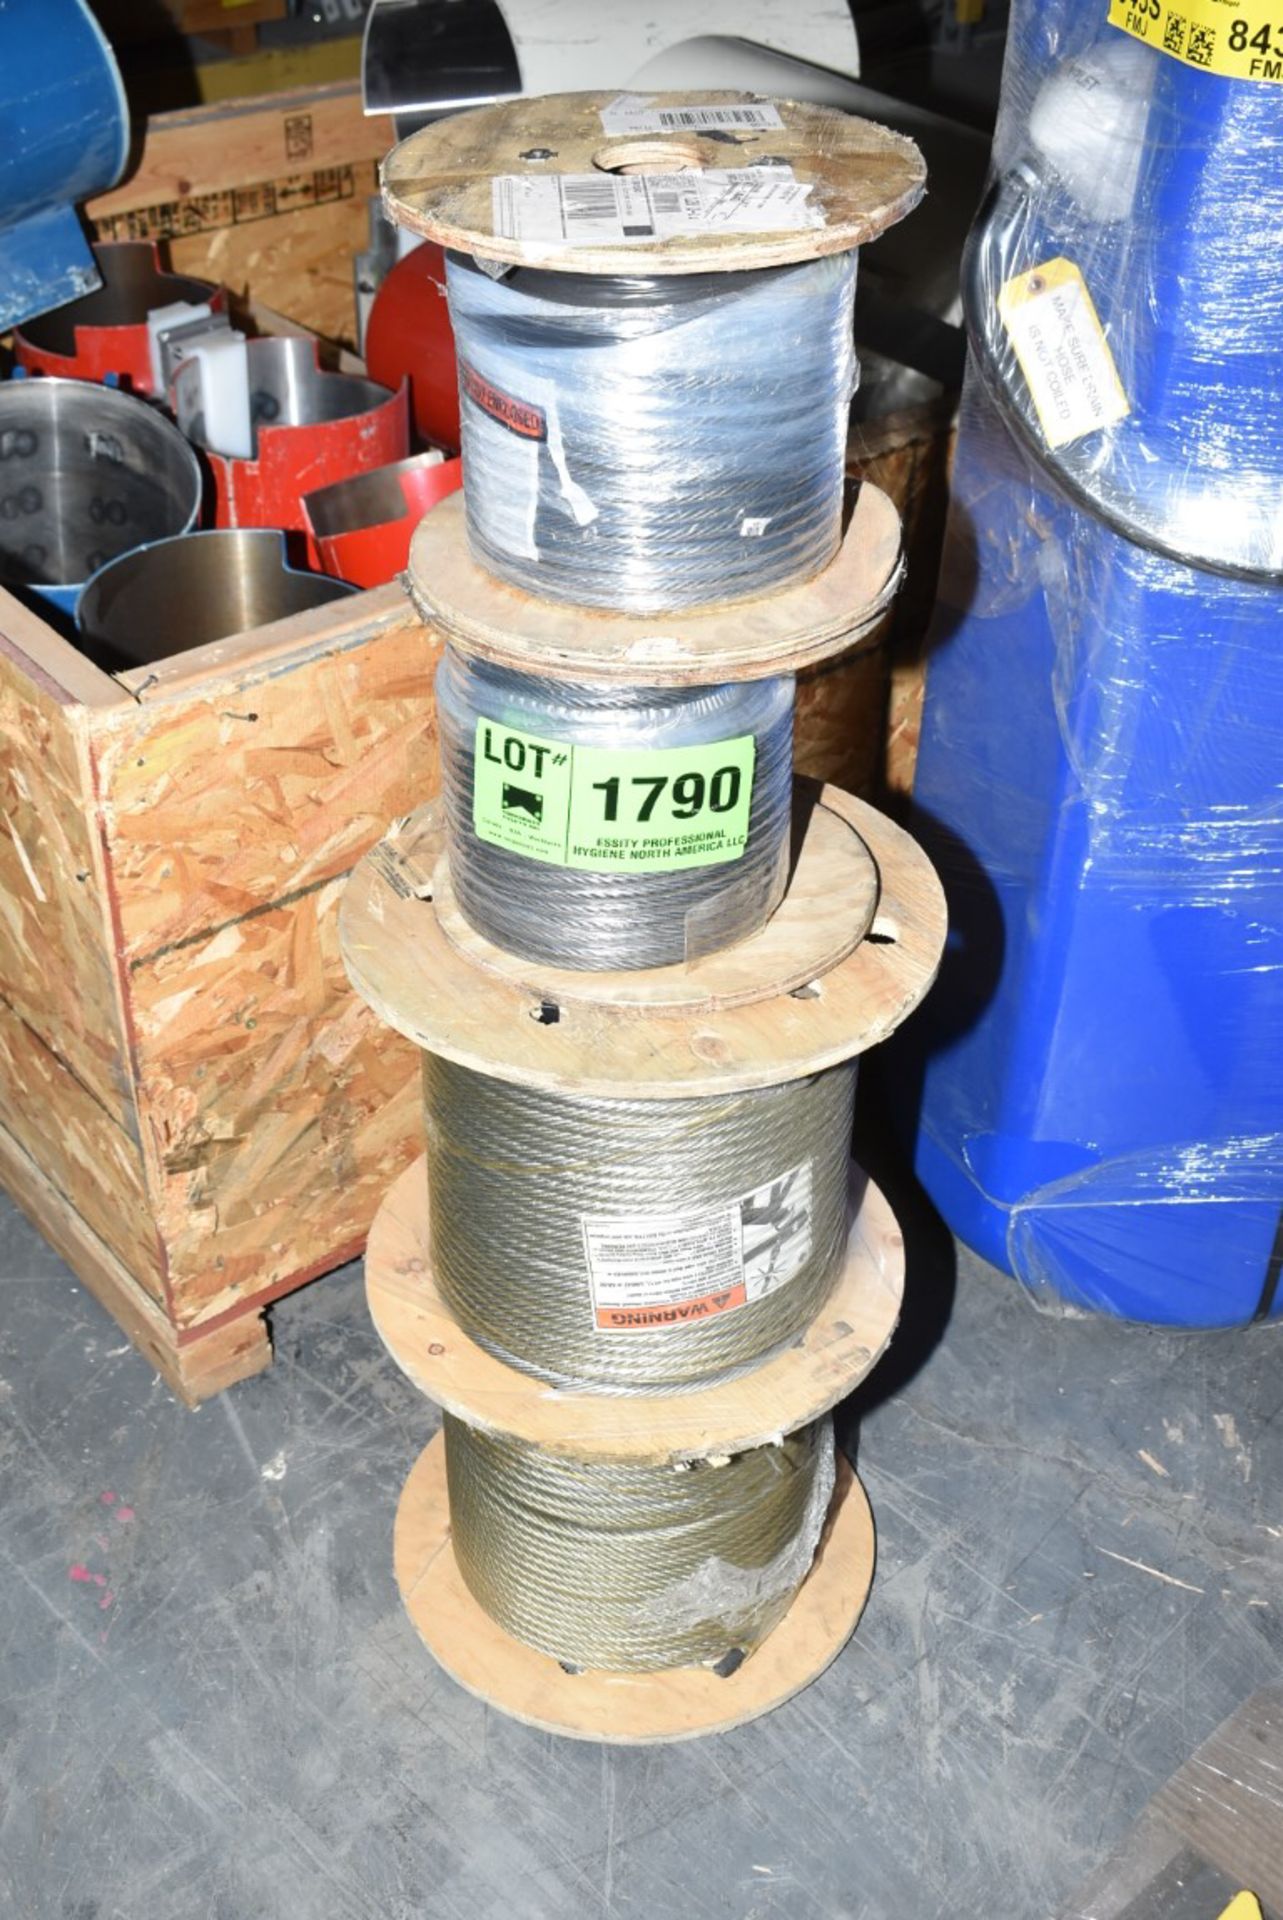 LOT/ BRAIDED WIRE CABLE [RIGGING FEE FOR LOT #1790 - $25 USD PLUS APPLICABLE TAXES]